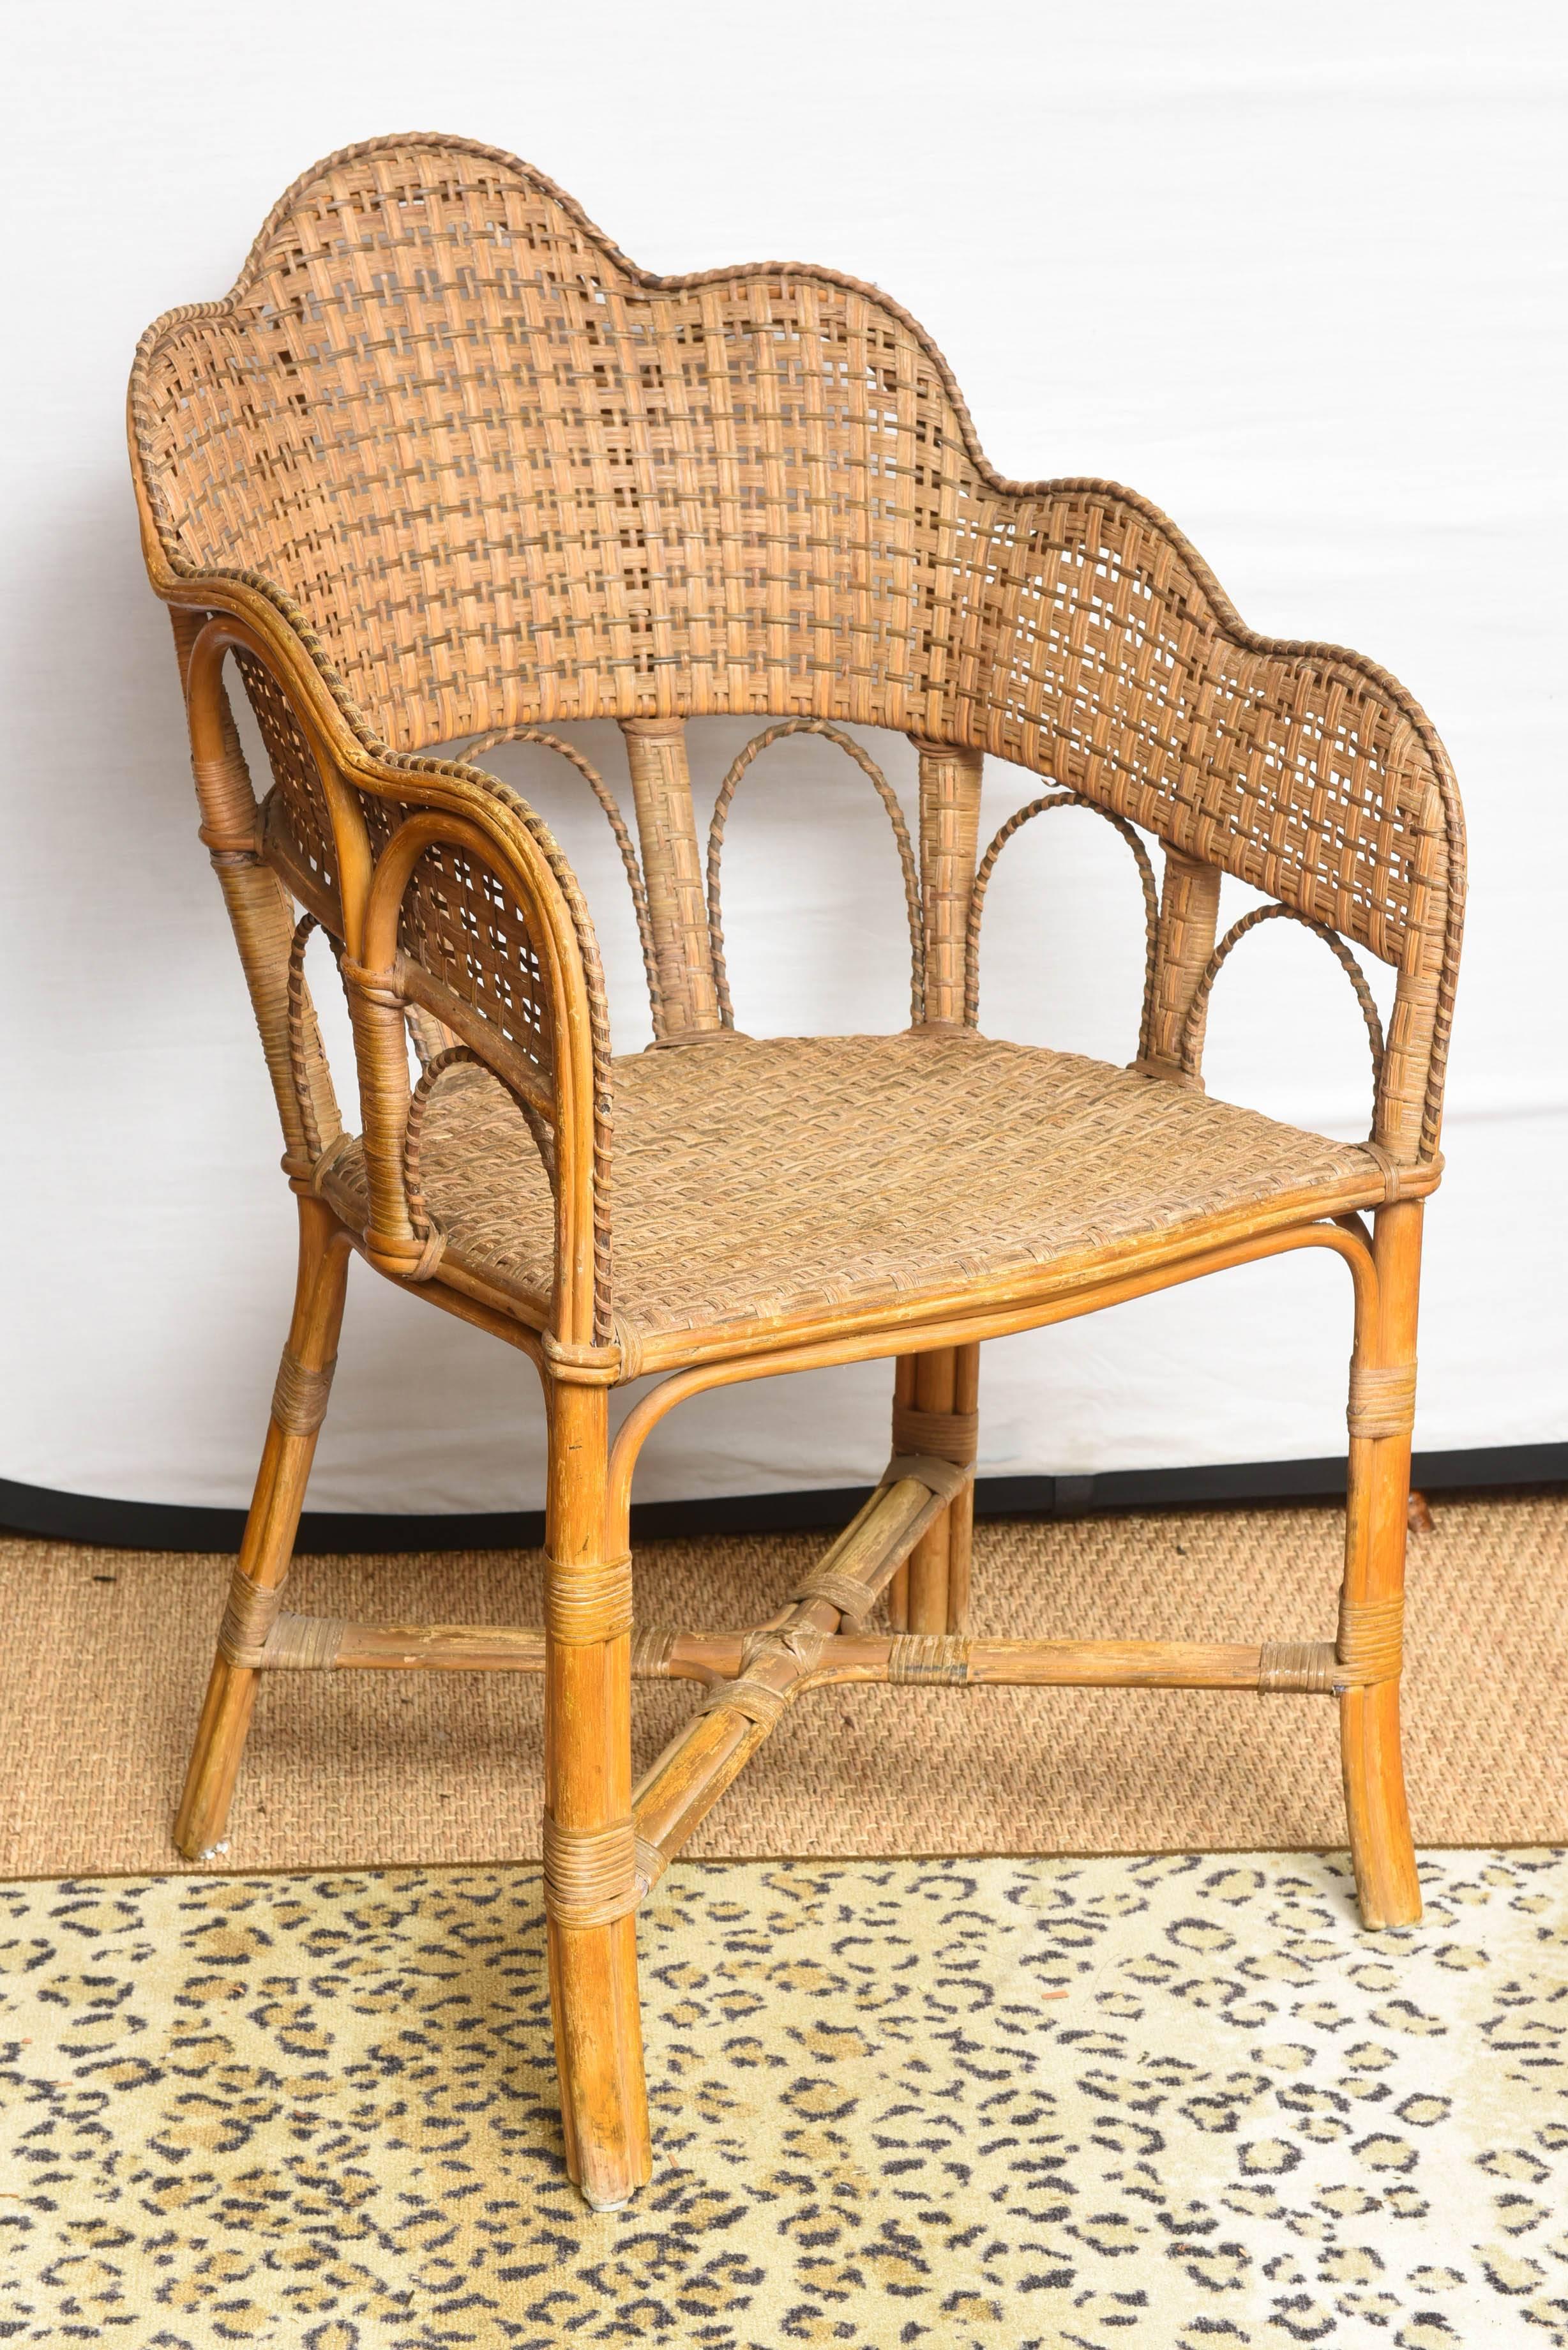 Set of Very Unusual French Vintage Rattan Table and Chair 1